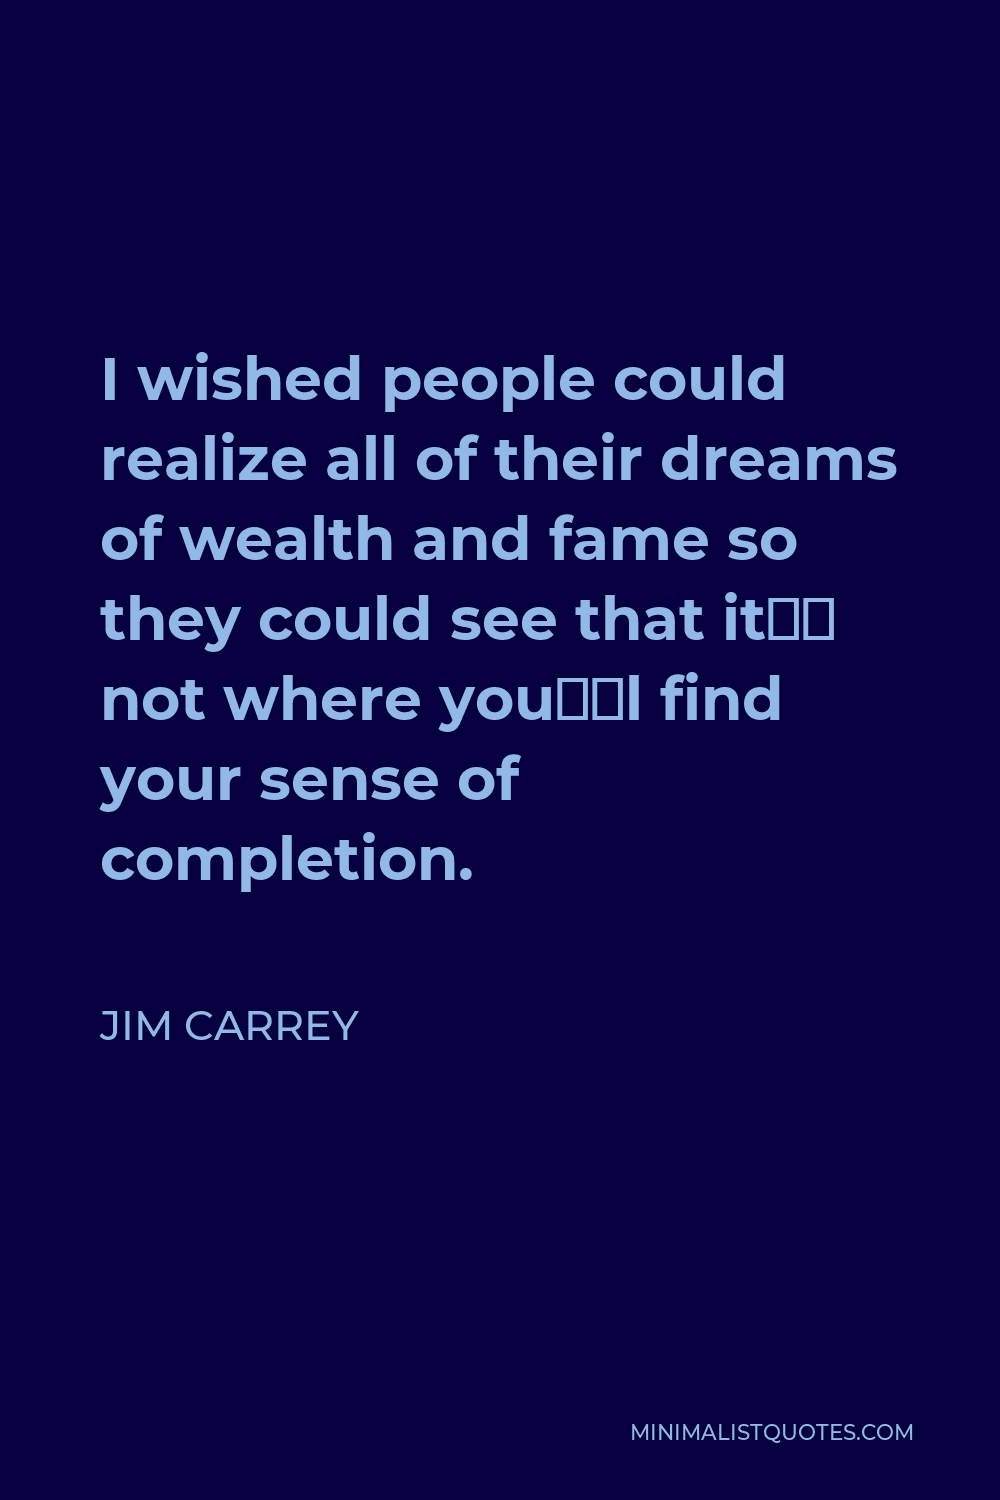 Jim Carrey Quote - I wished people could realize all of their dreams of wealth and fame so they could see that it’s not where you’ll find your sense of completion.